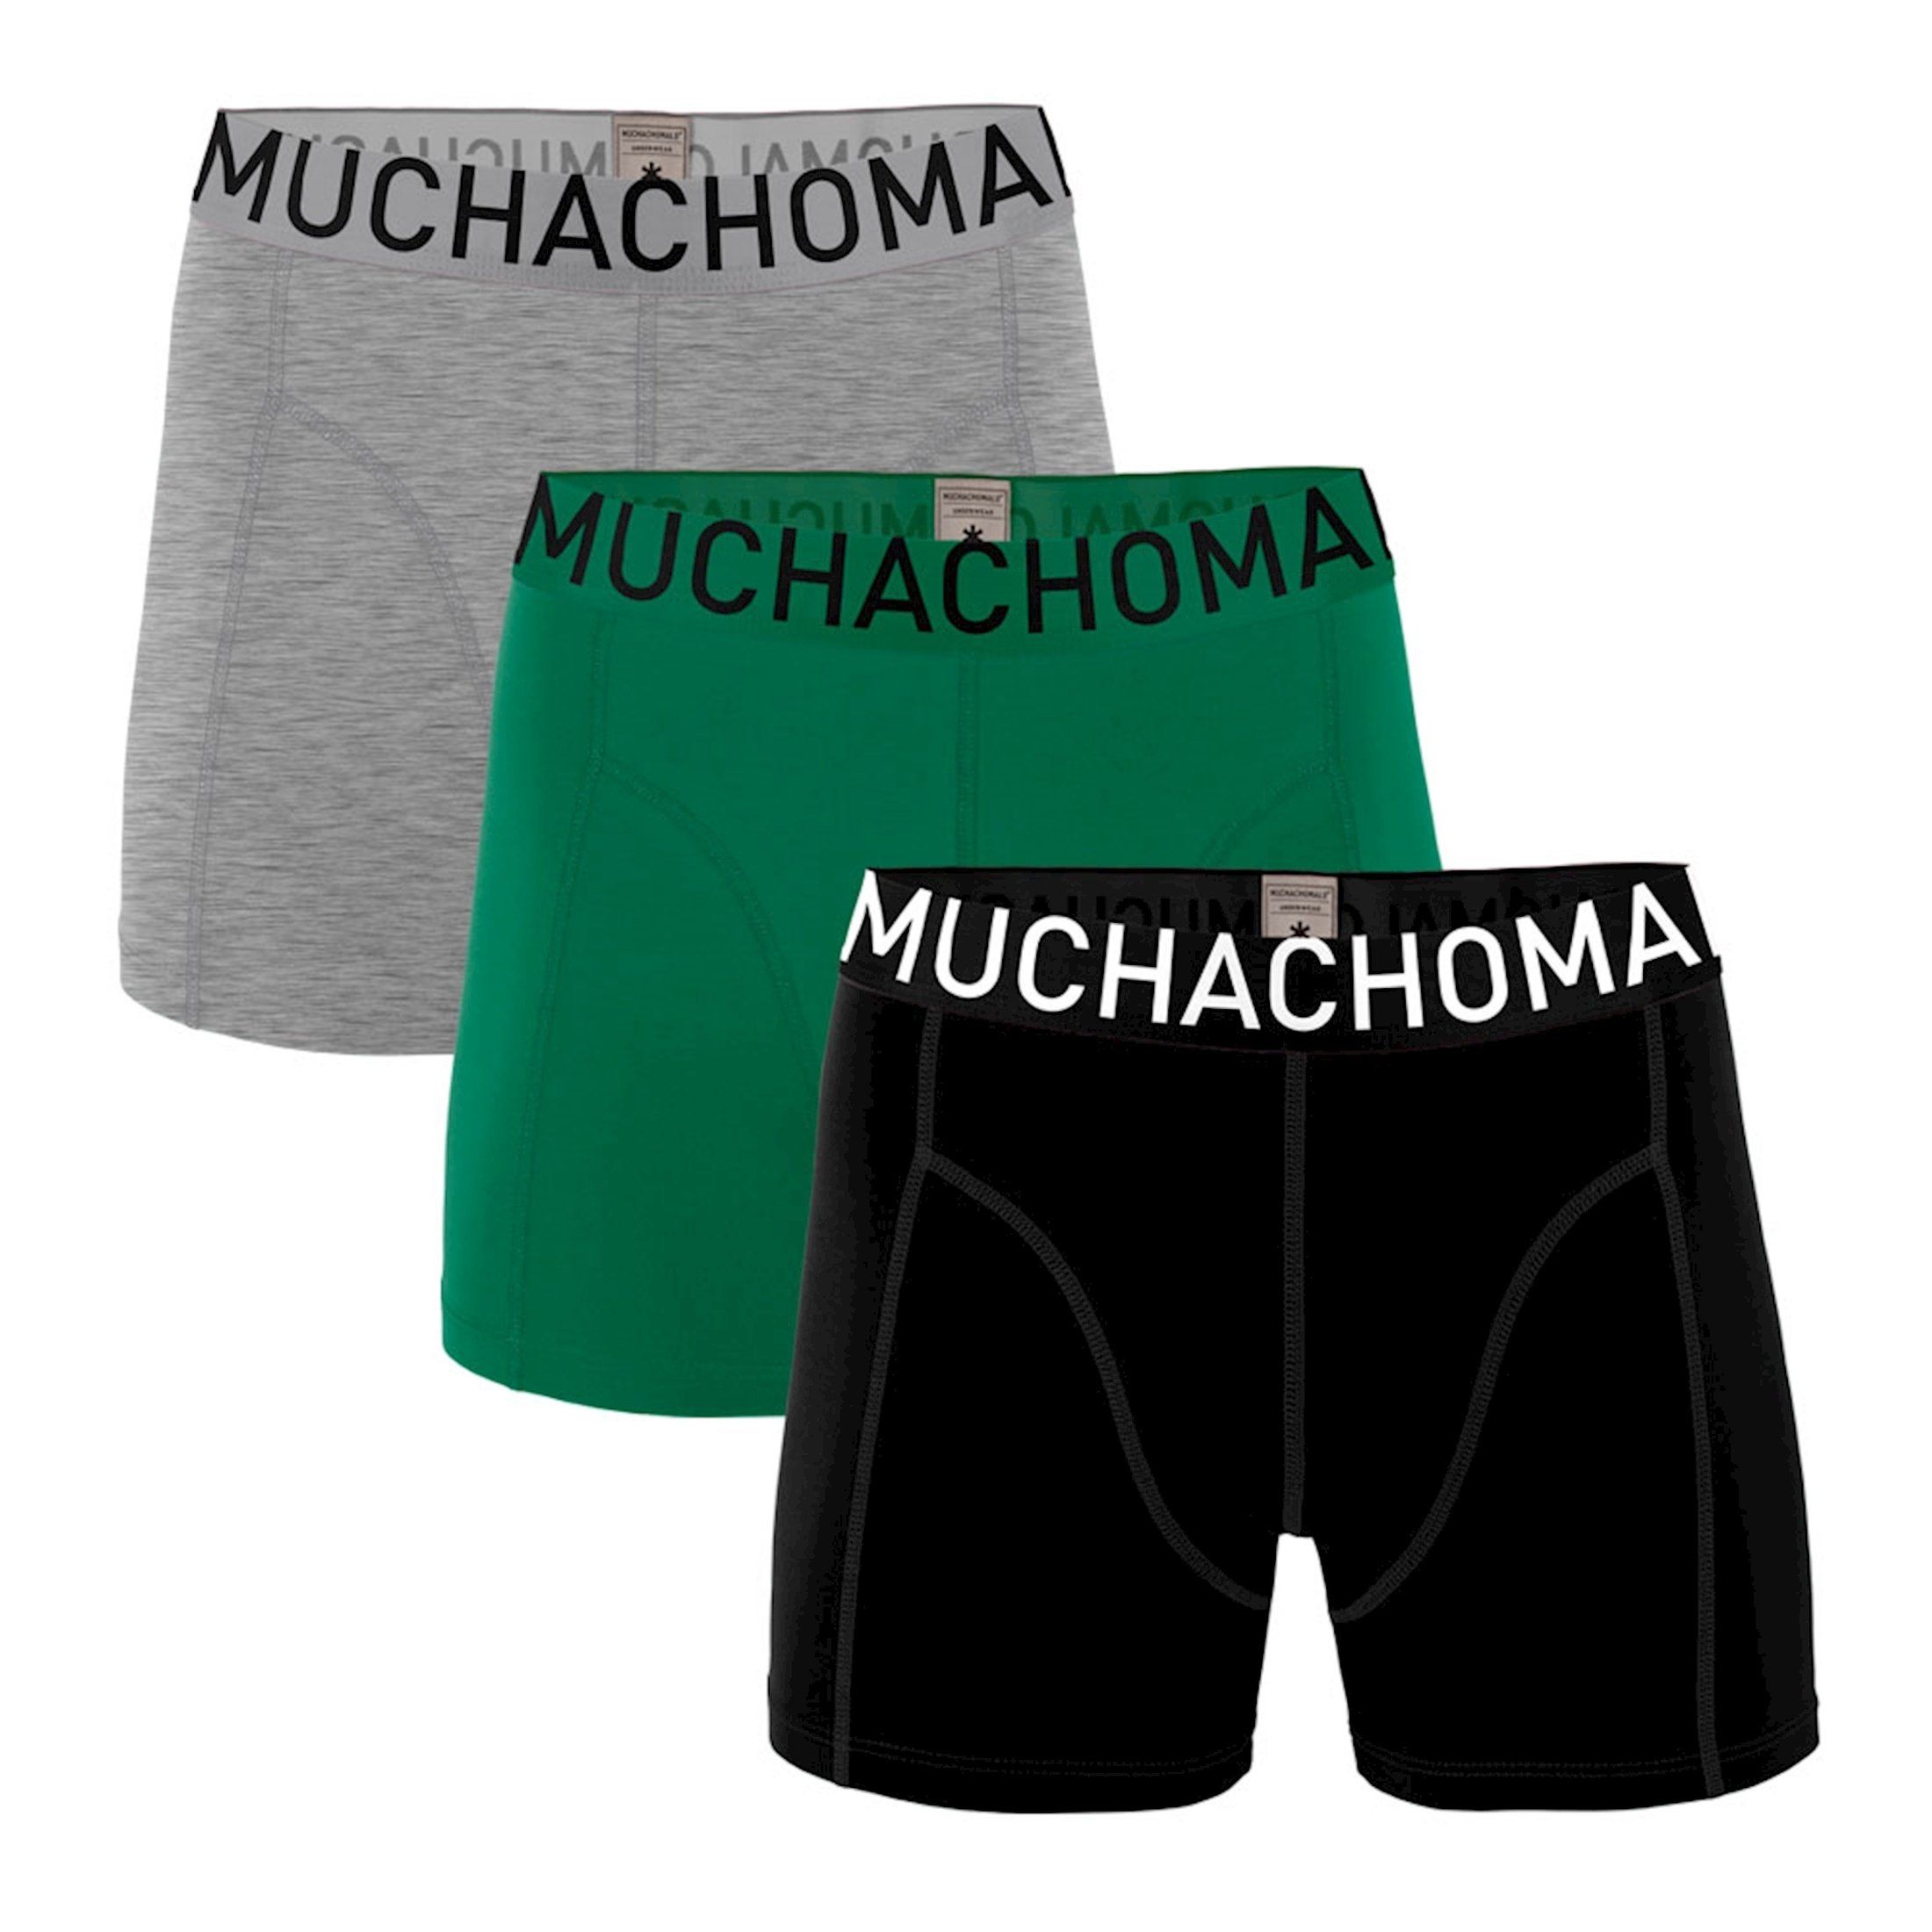 Muchachomalo Boxer Shorts Sold 3-Pack Black Green Grey size XL